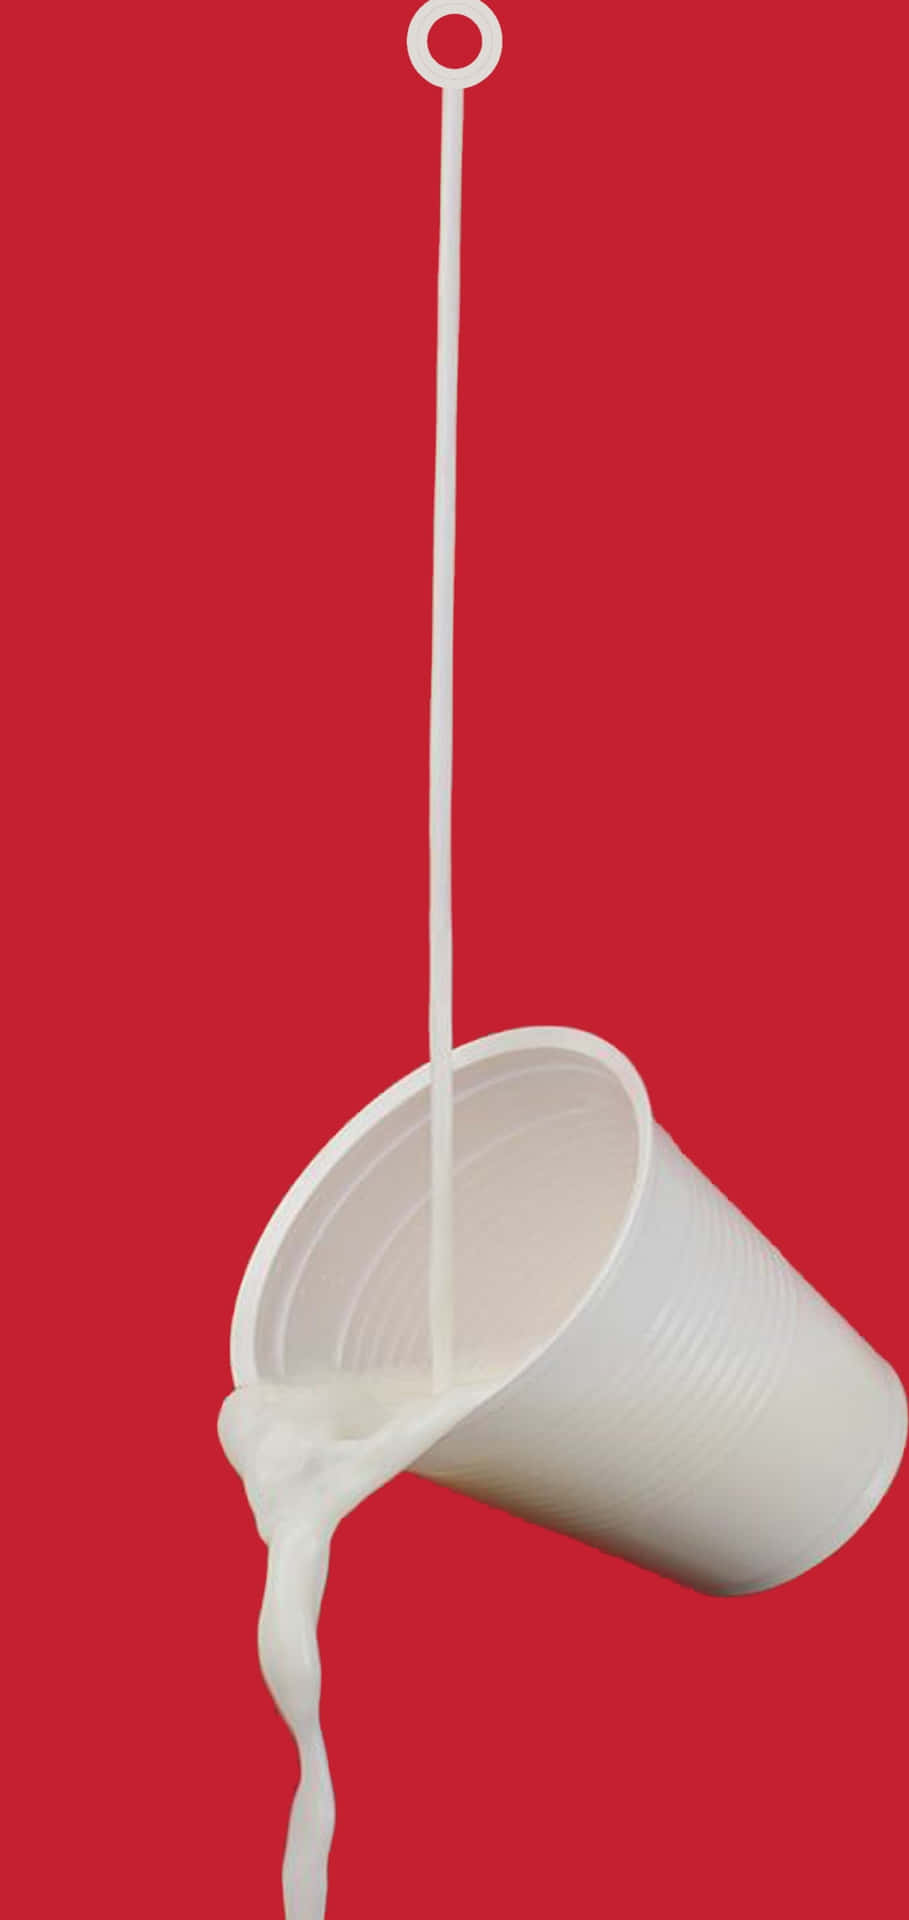 A Cup Of Milk Is Dripping From A Red Background